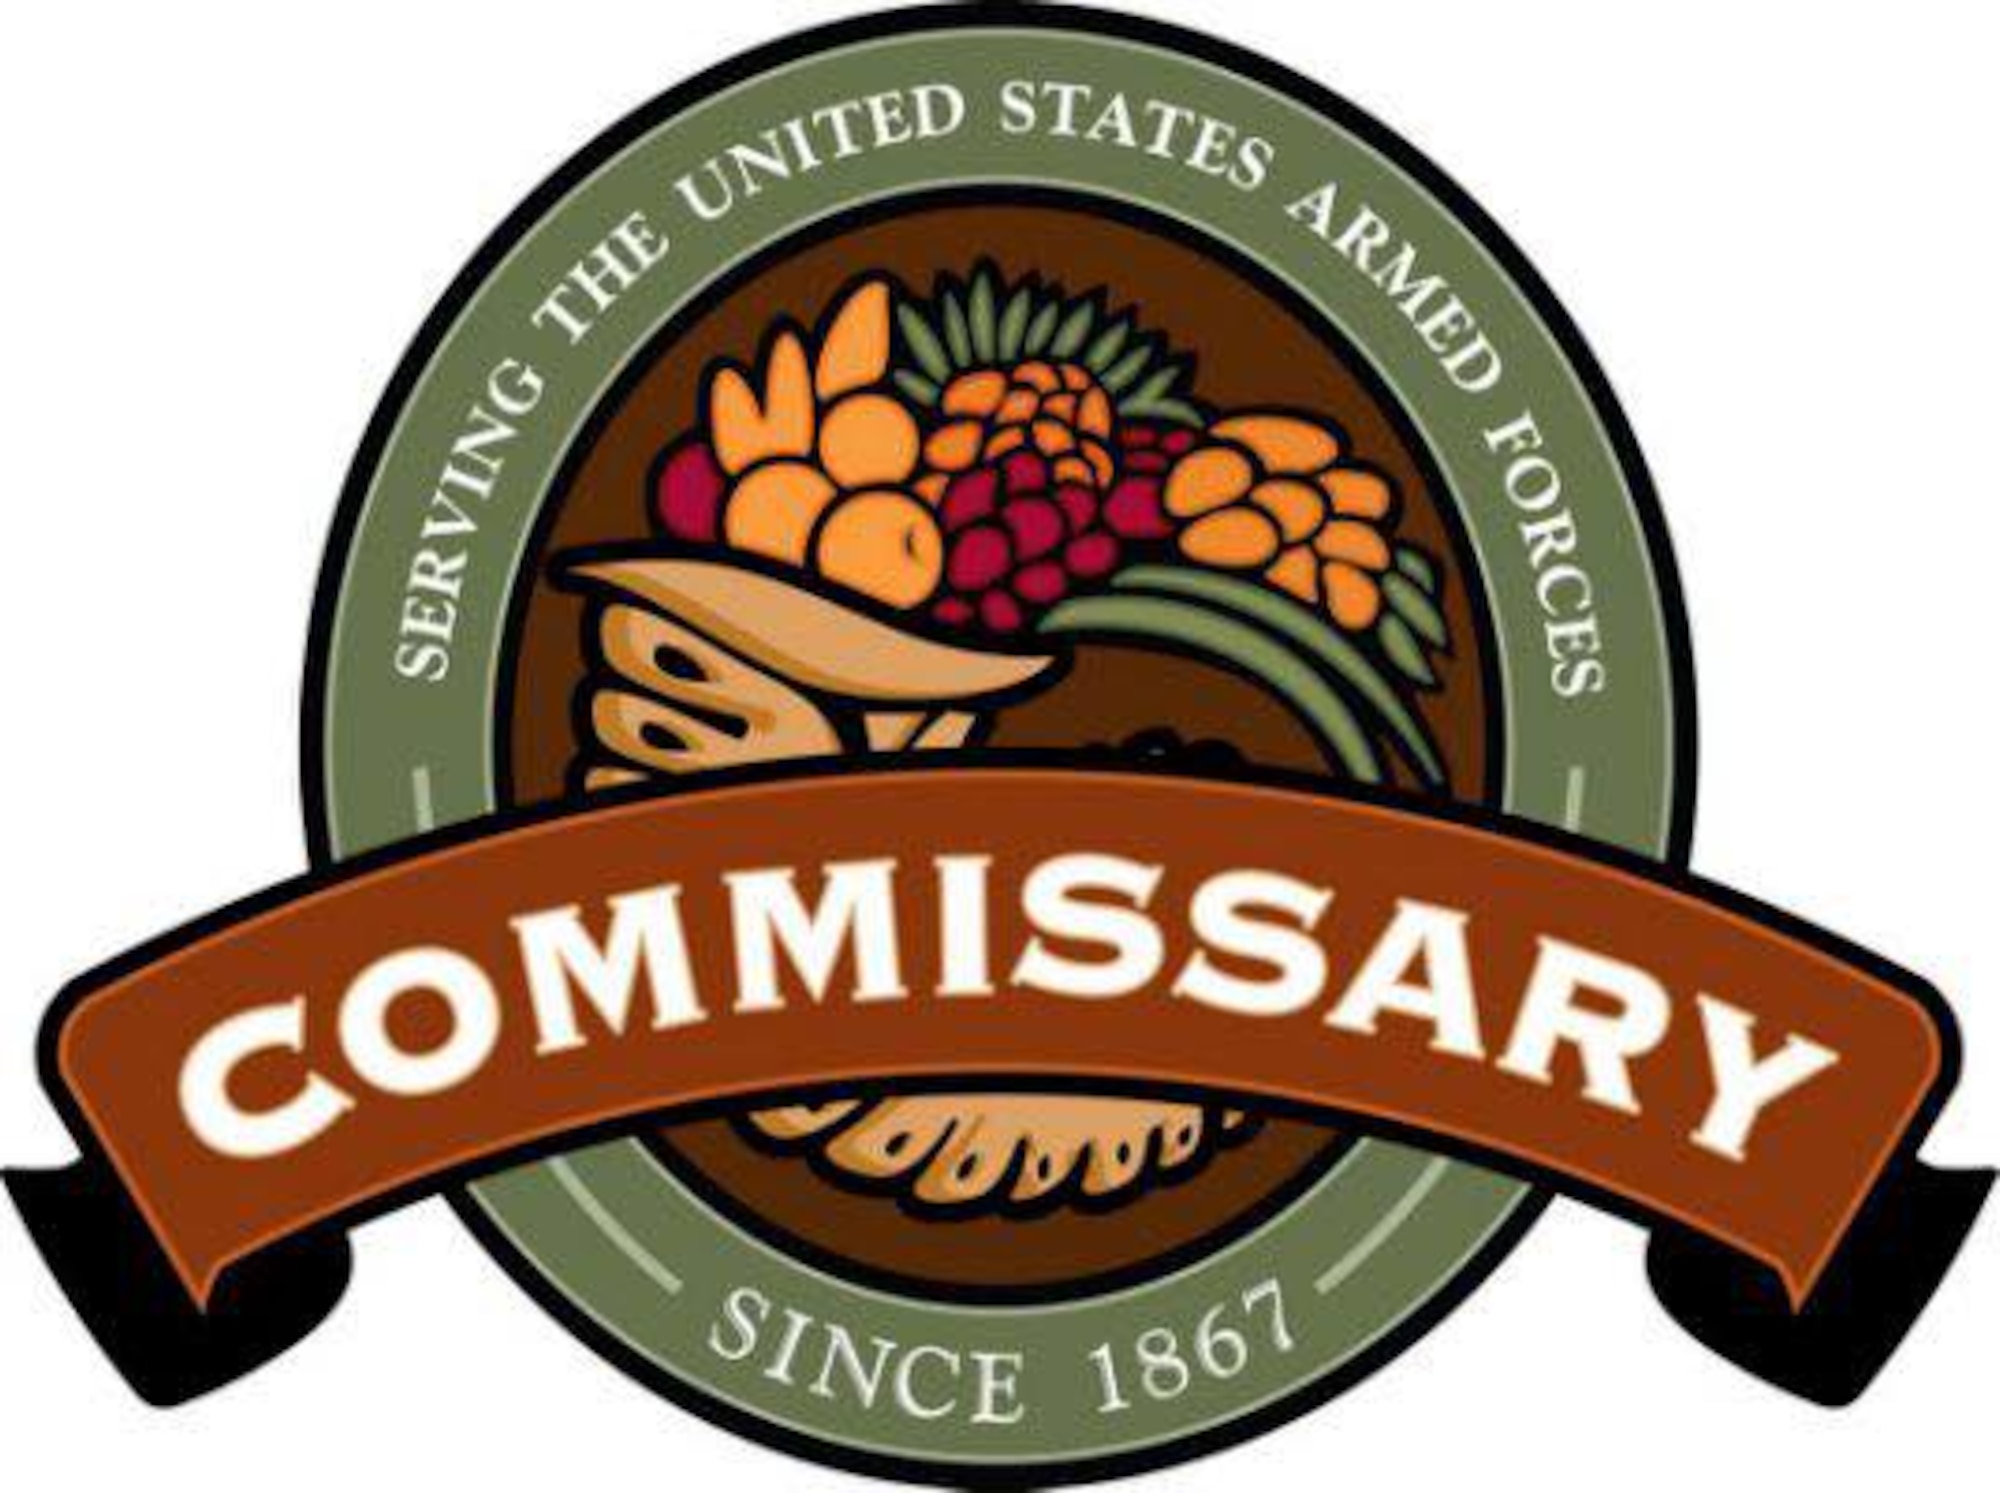 Graphic showing the Commissary logo.